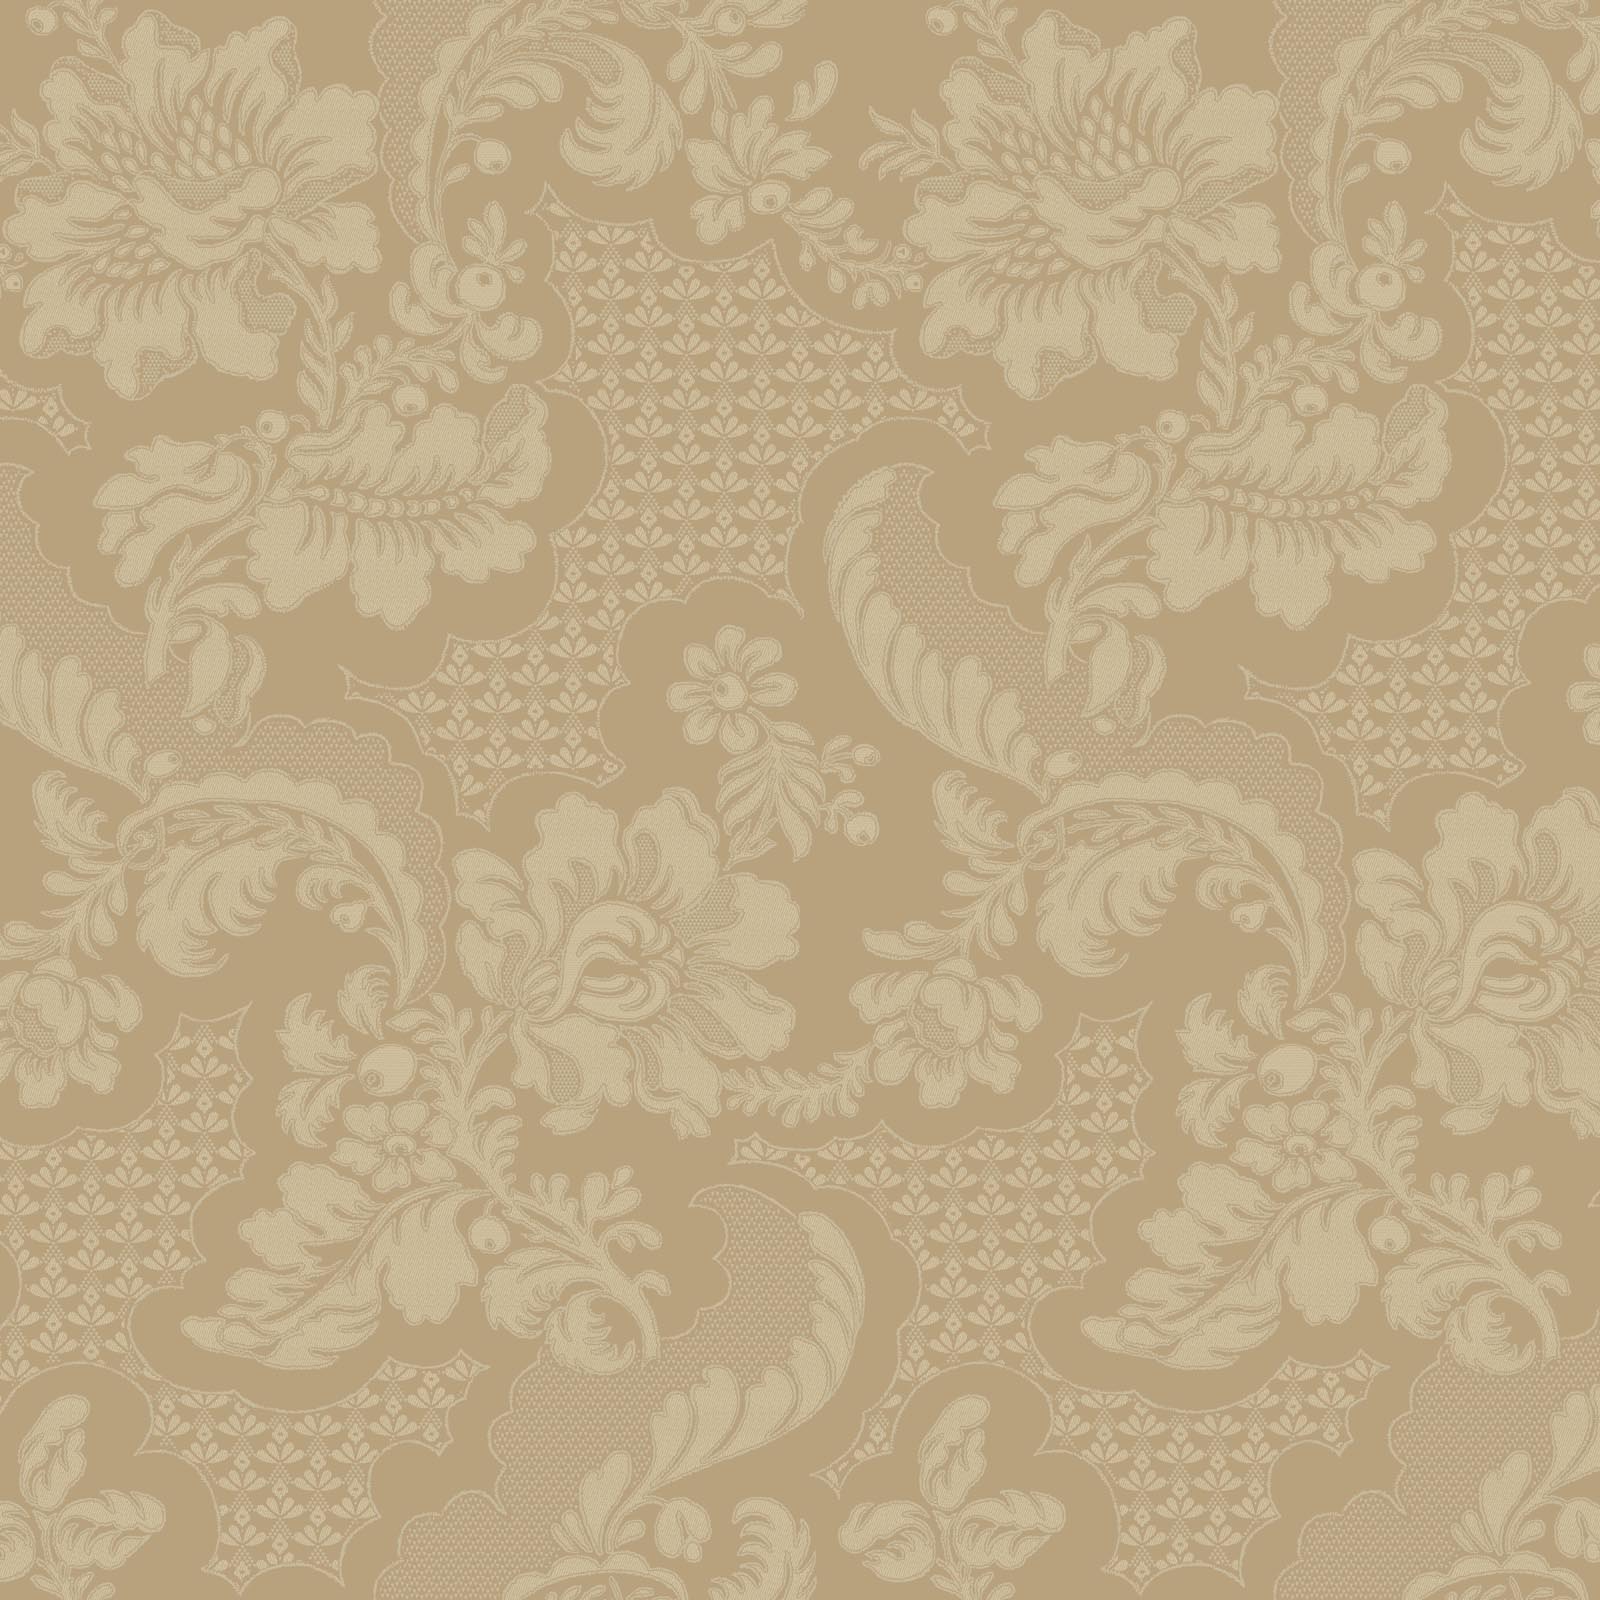 Williamsburg Iii Tazewell Damask 61 Wallpaper - Knitted Baby Booties ...